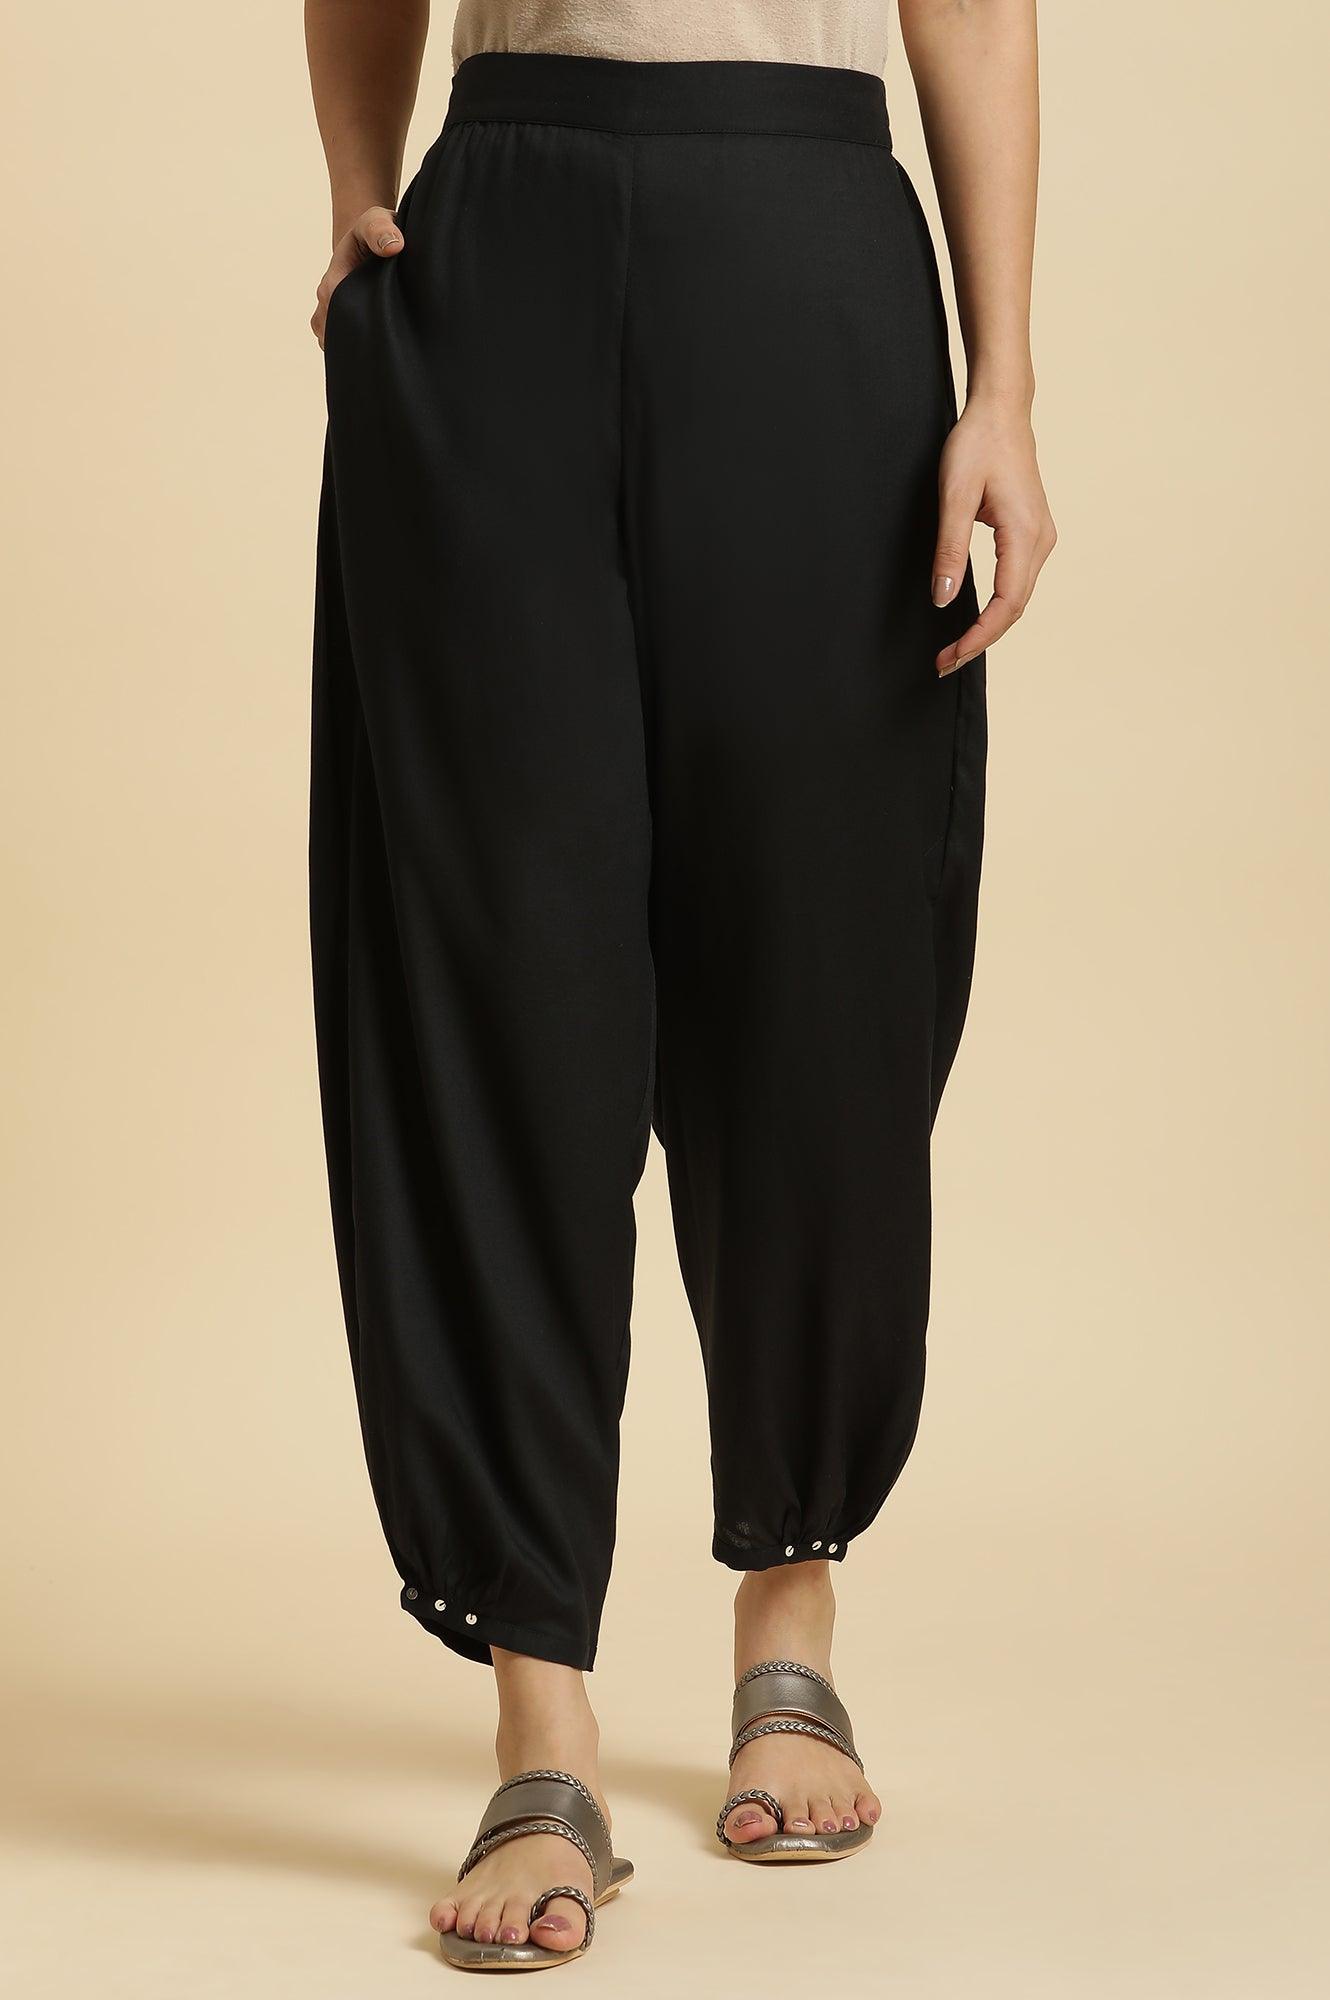 Black Side Gather Pants With Sequin Details - wforwoman